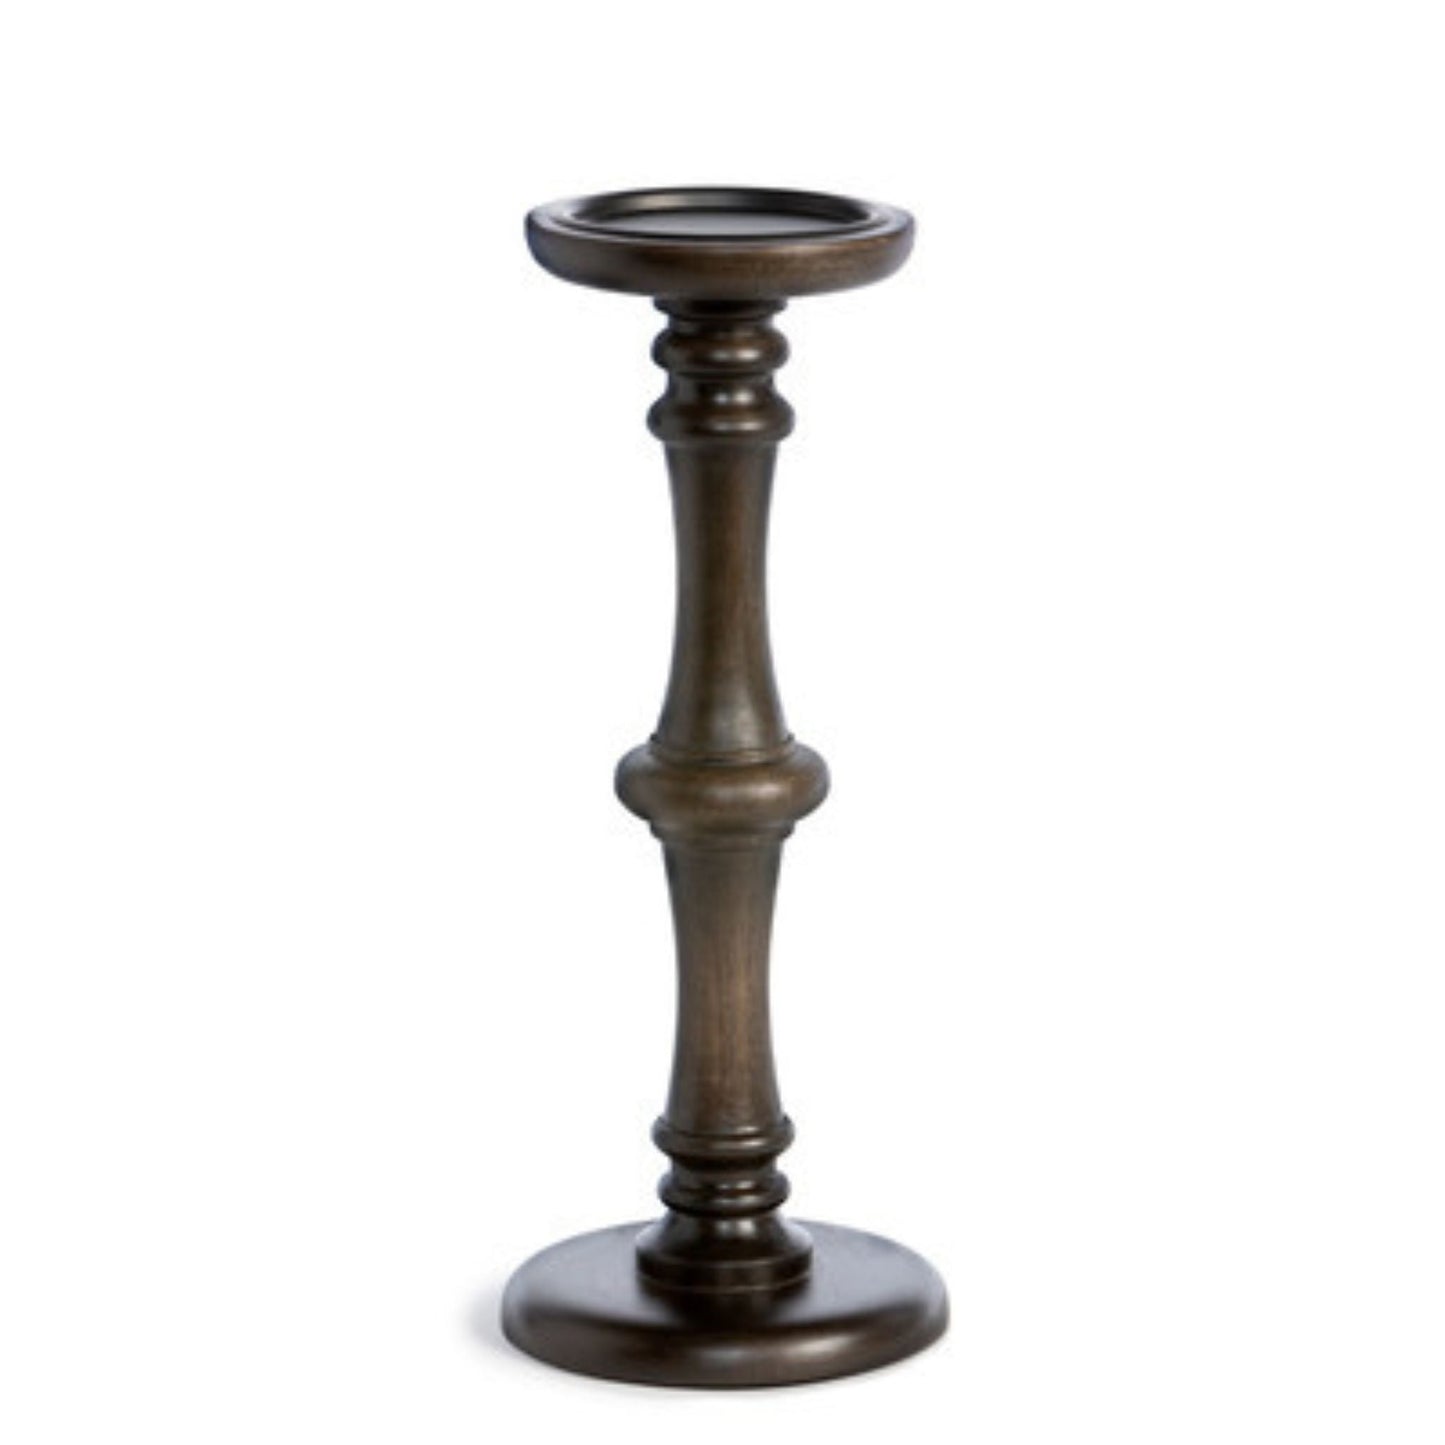 french-country-turned-wood-candlestick-large-home-decor-park-hill-2-Threadbare Gypsy Soul